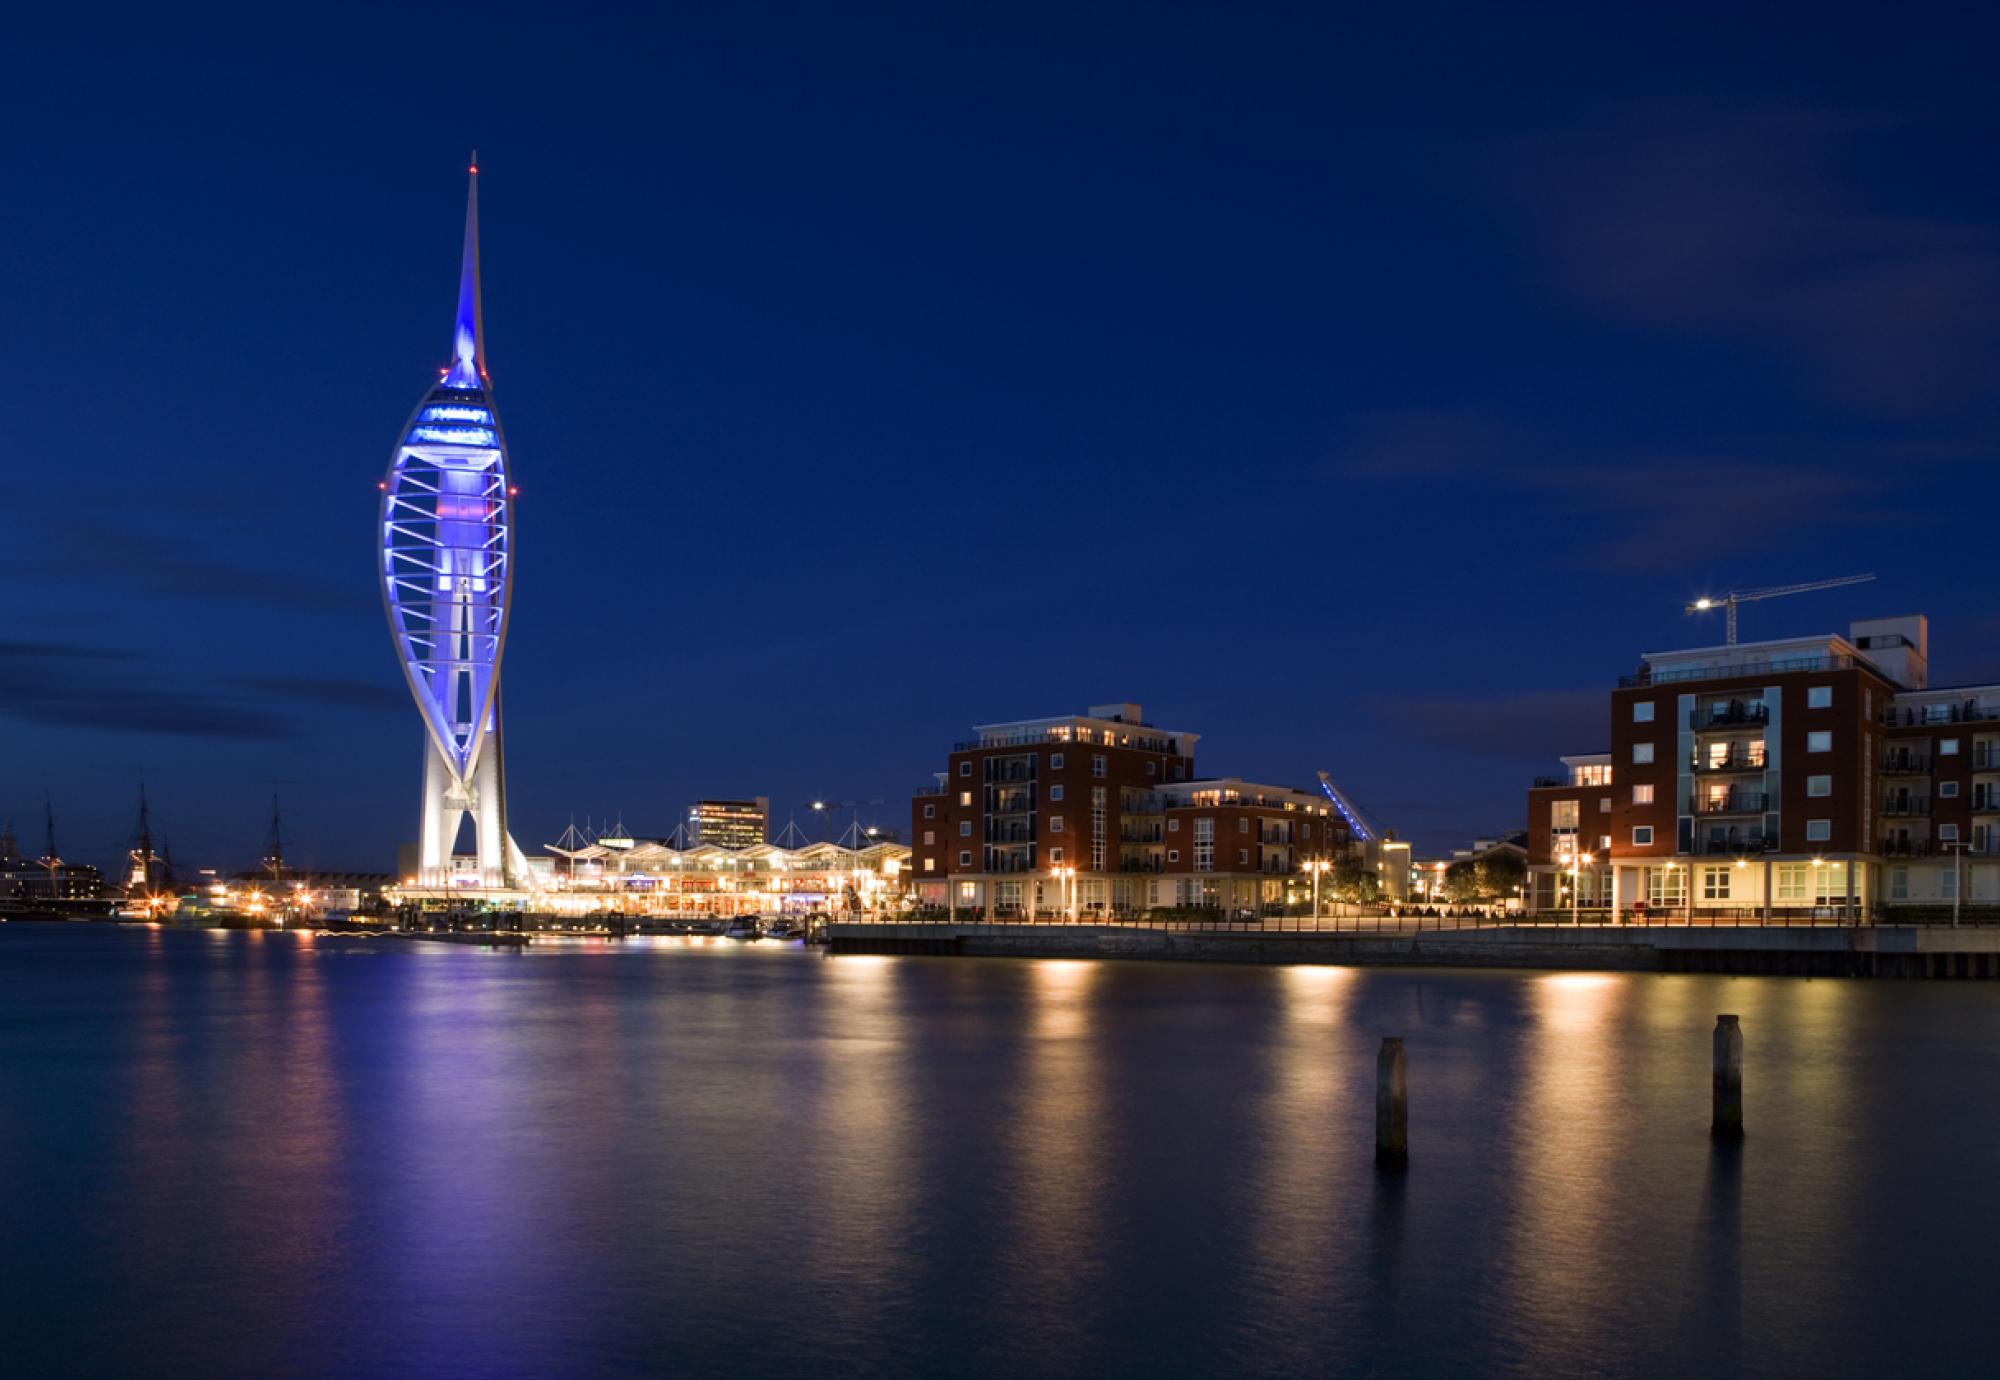 Spinnaker tower at night, Portsmouth